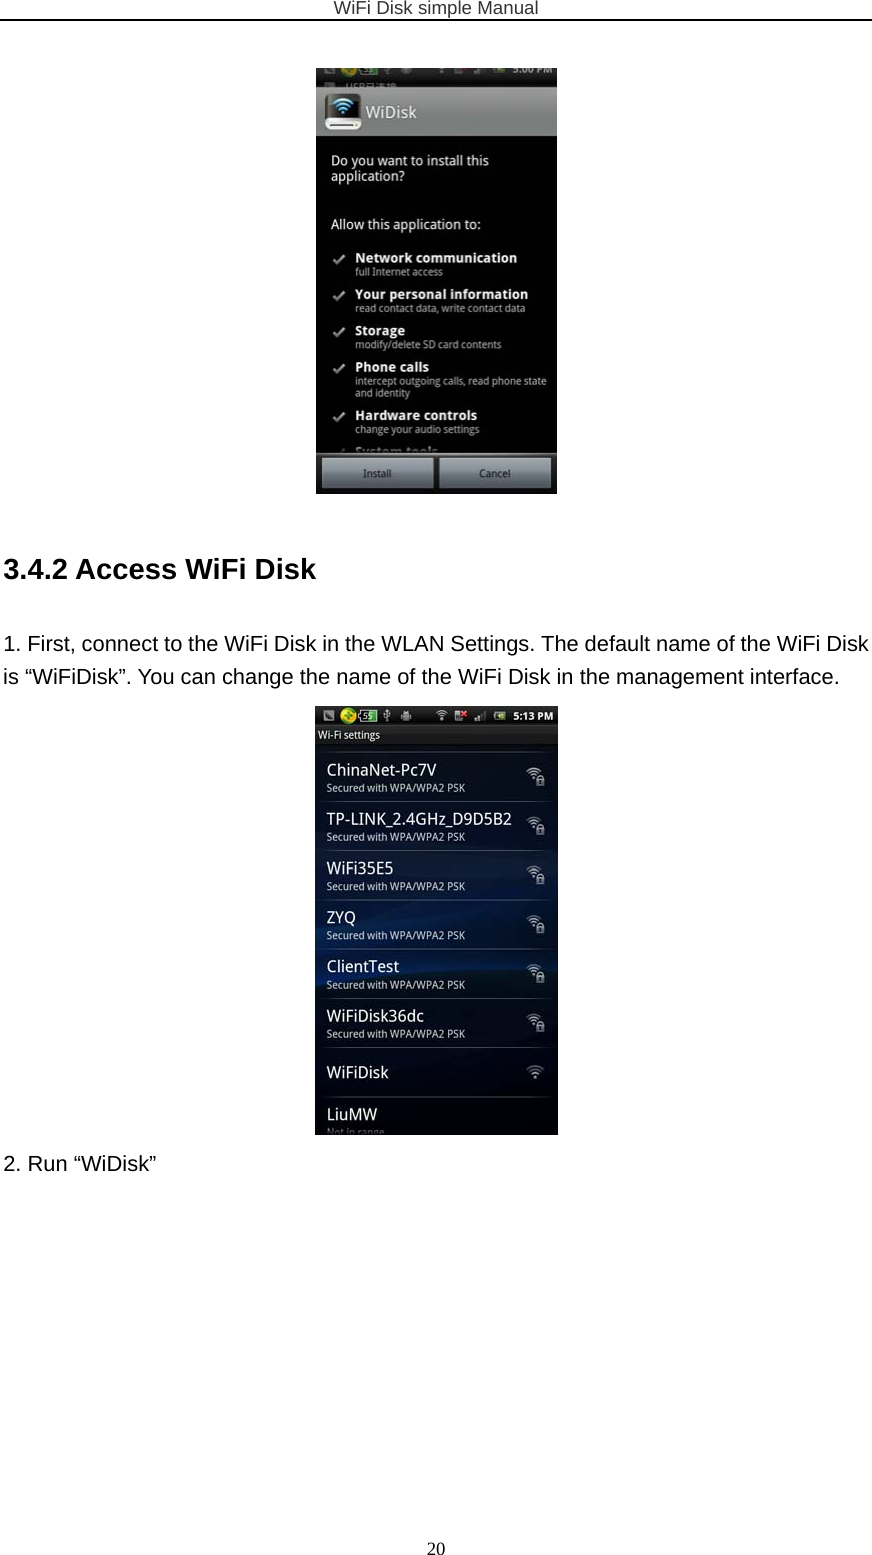 WiFi Disk simple Manual  20 3.4.2 Access WiFi Disk 1. First, connect to the WiFi Disk in the WLAN Settings. The default name of the WiFi Disk is “WiFiDisk”. You can change the name of the WiFi Disk in the management interface.  2. Run “WiDisk” 